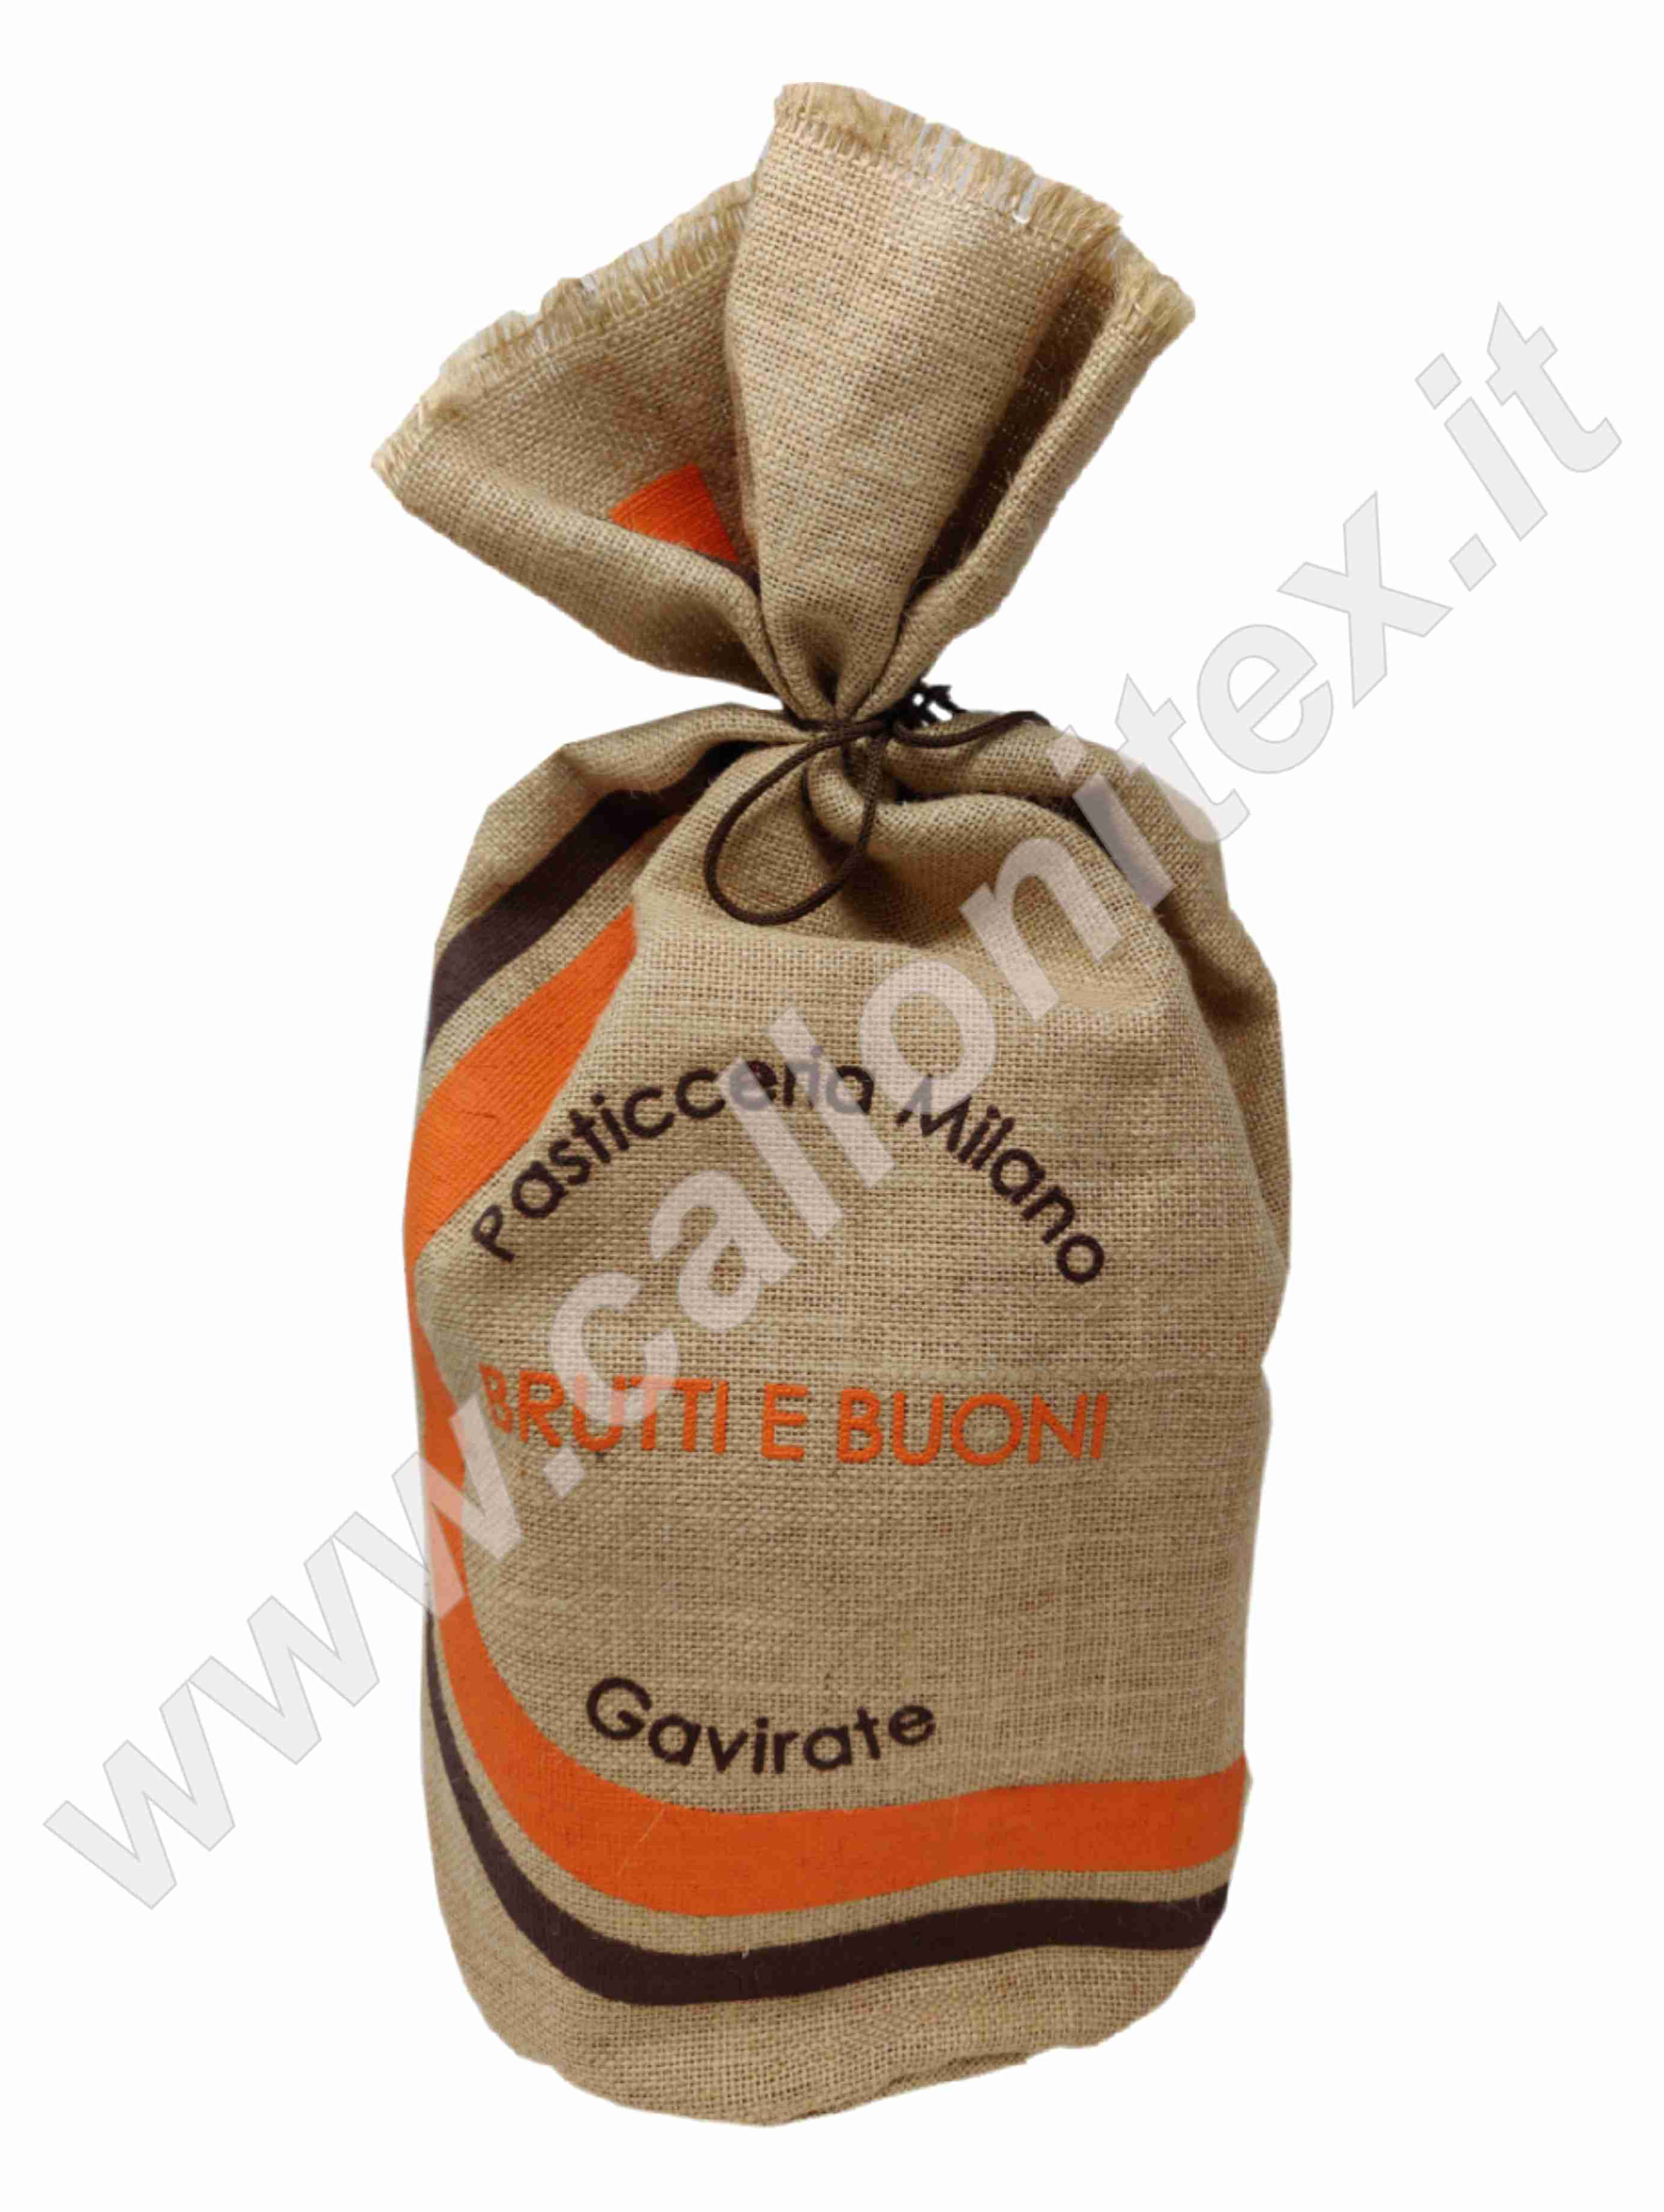 Jute bag for typical products 